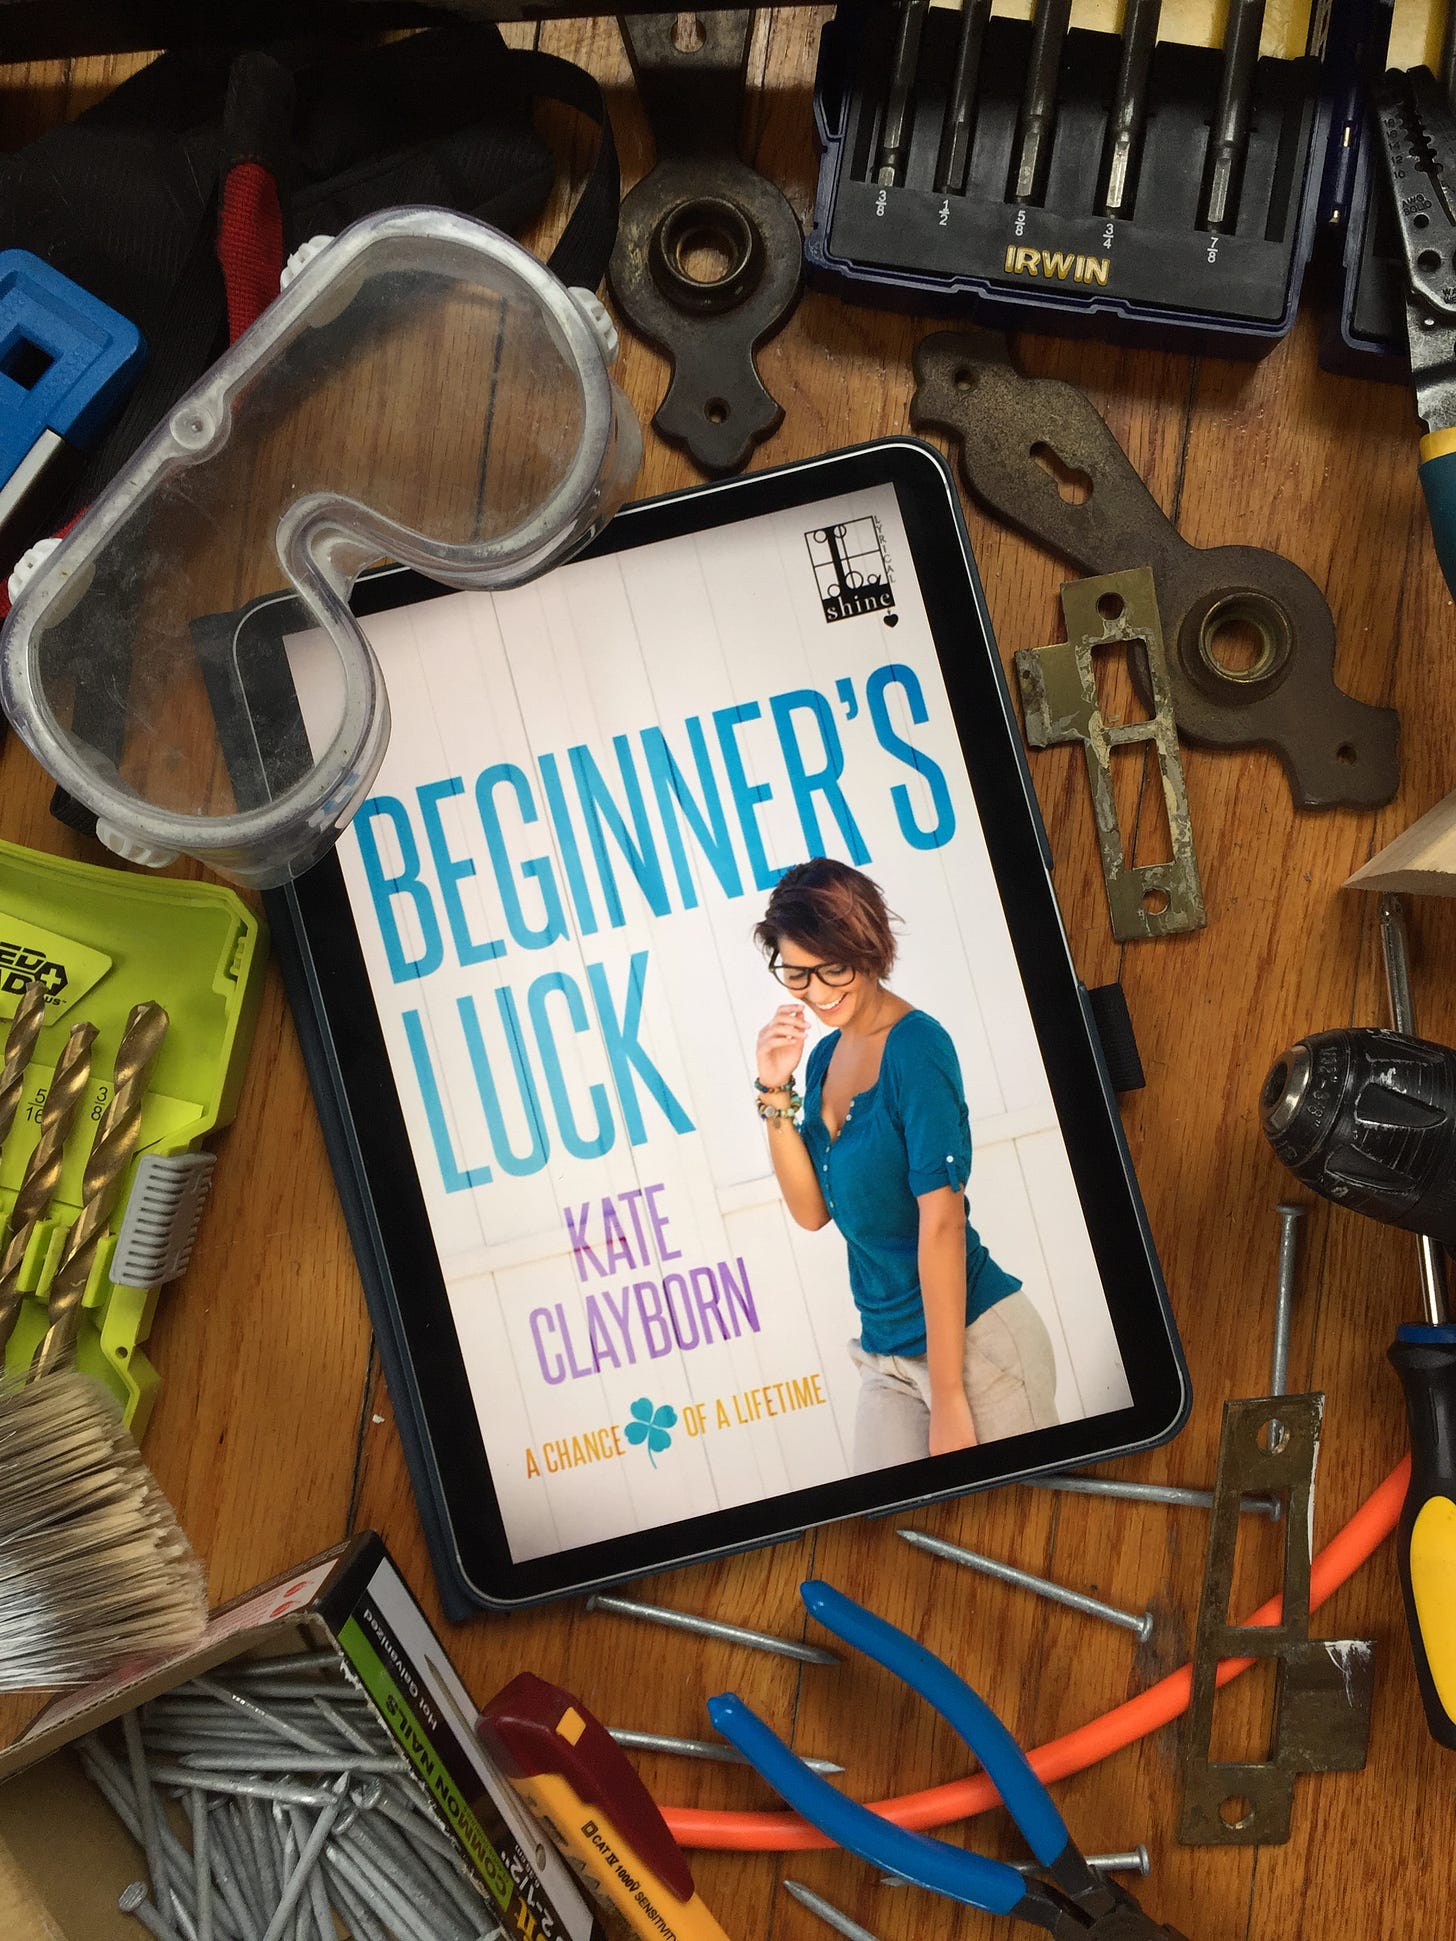 An ereader displaying the cover of Kate Clayborn's Beginner's Luck, surrounded by nails, tools, safety goggles, and door findings on a wood floor.